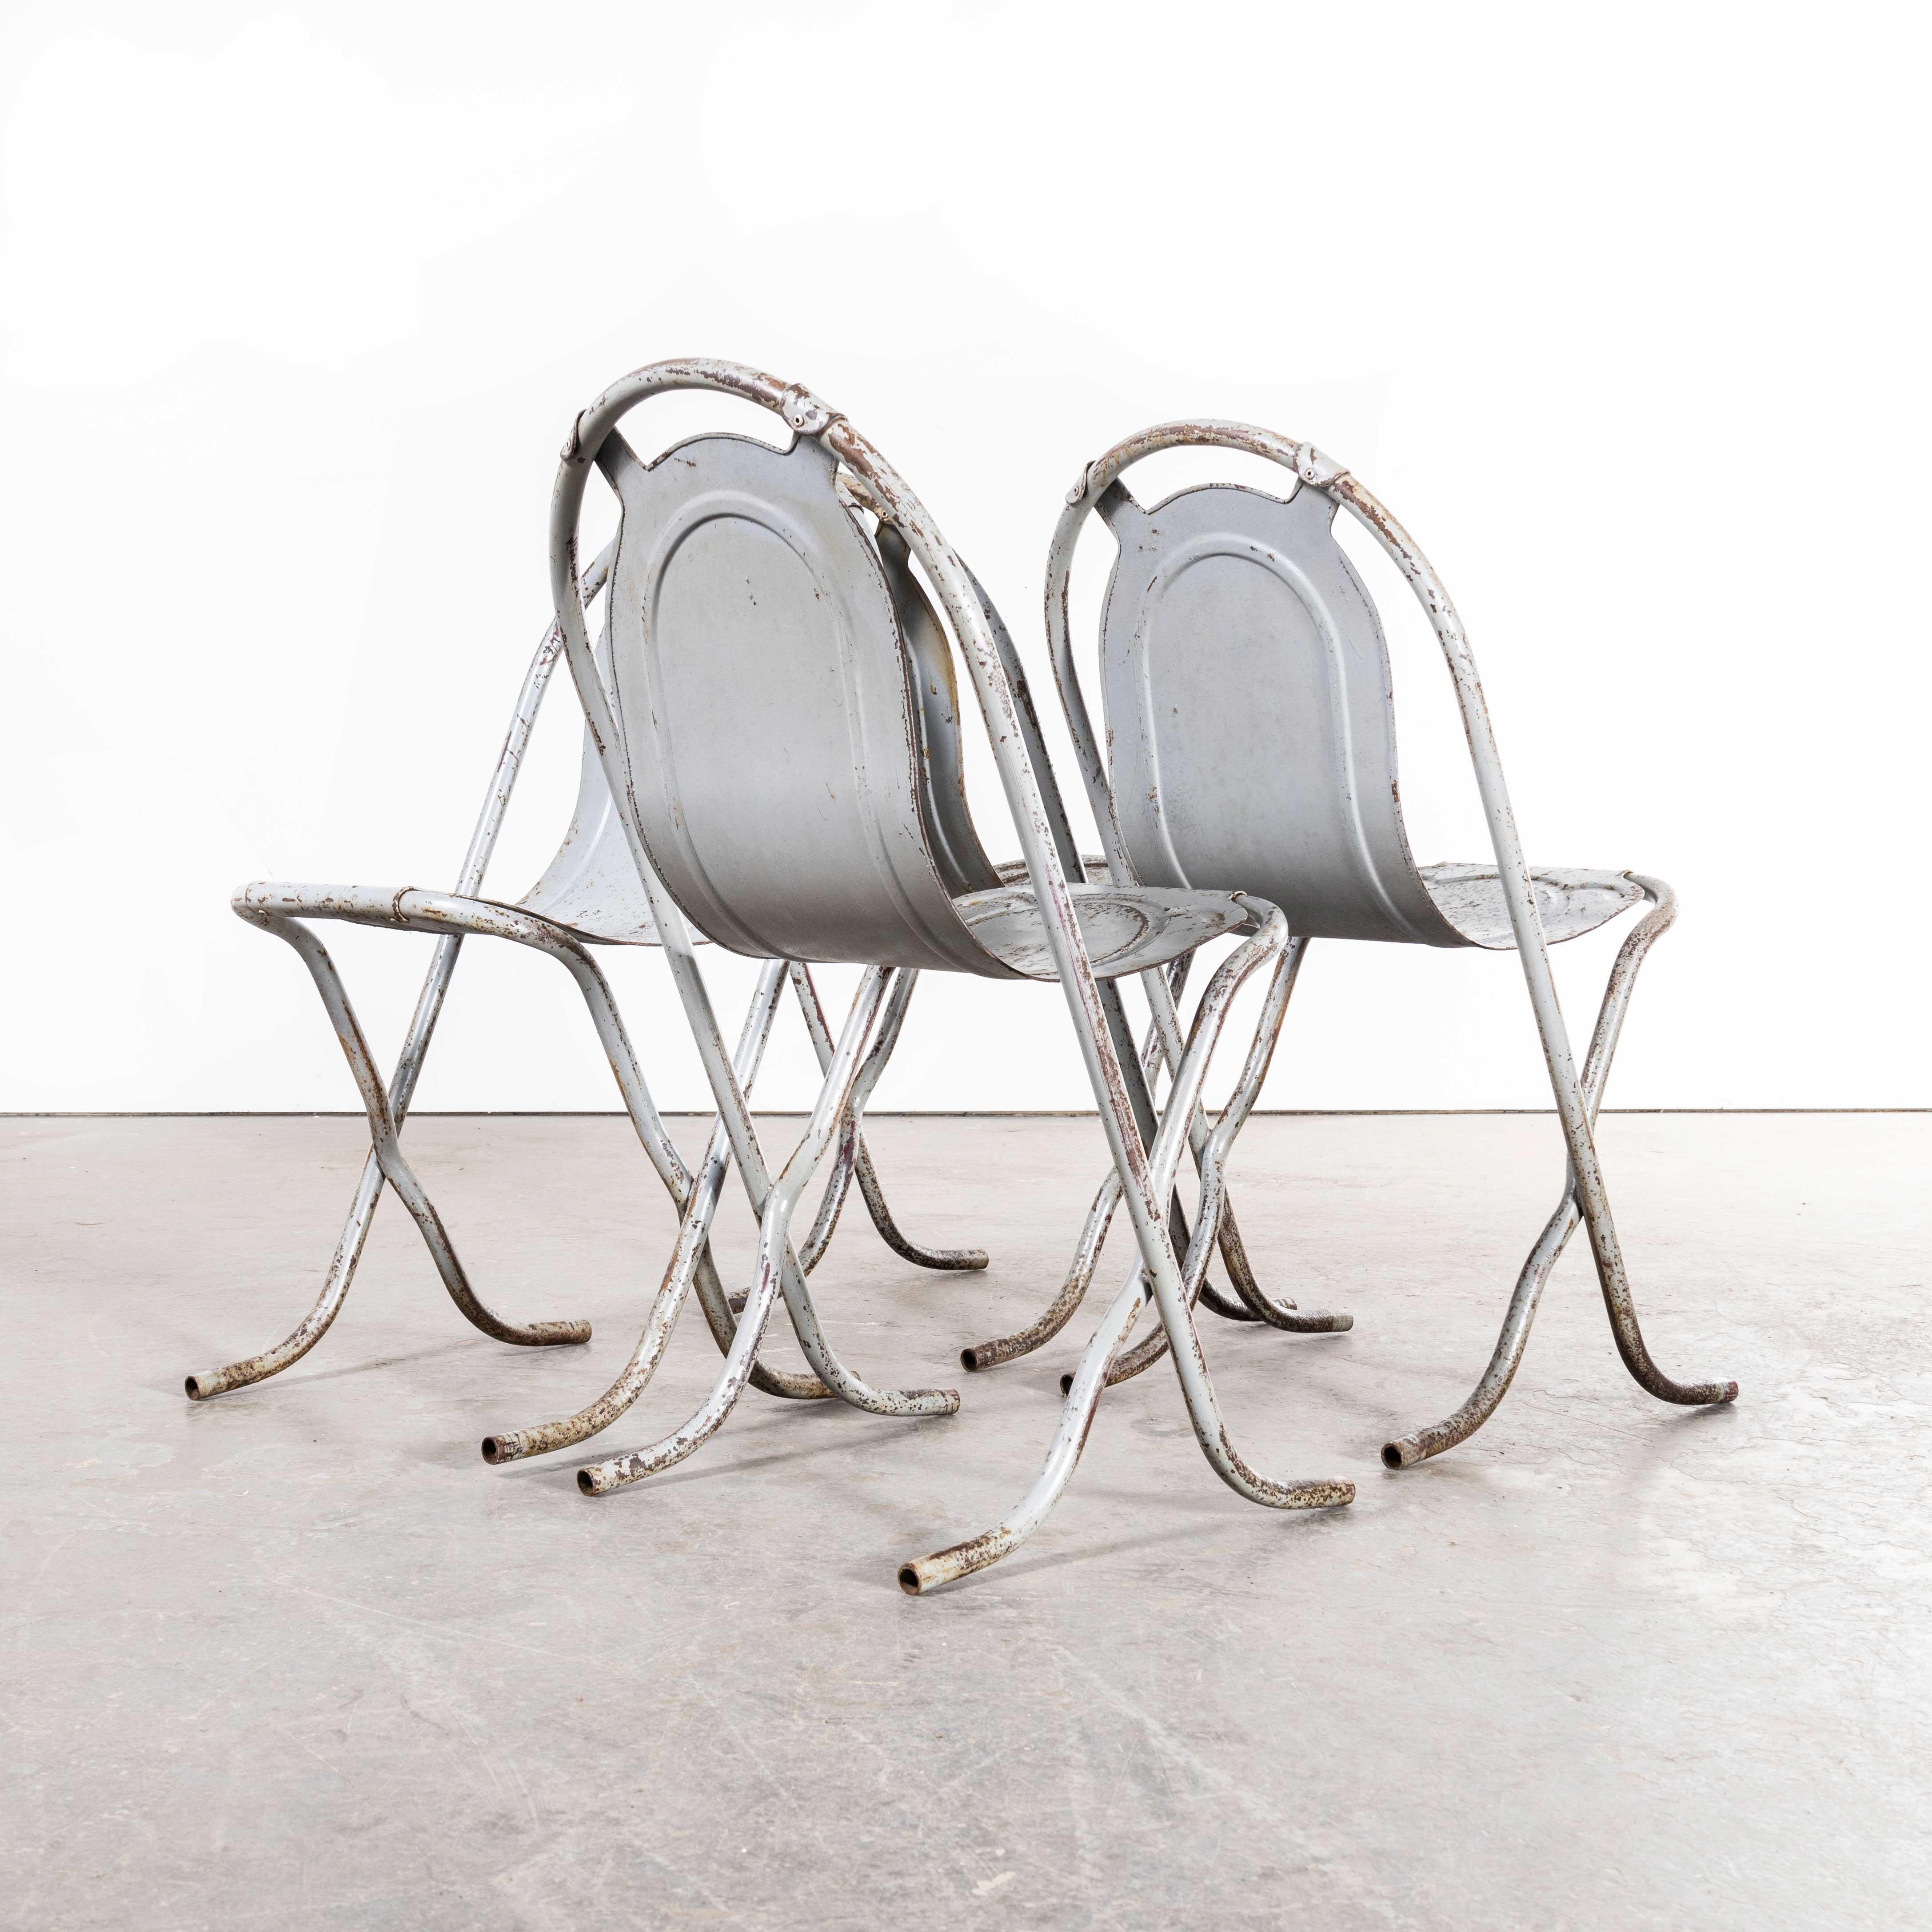 1940s Original British Stak a Bye Chairs, Grey, Set of Four For Sale 2